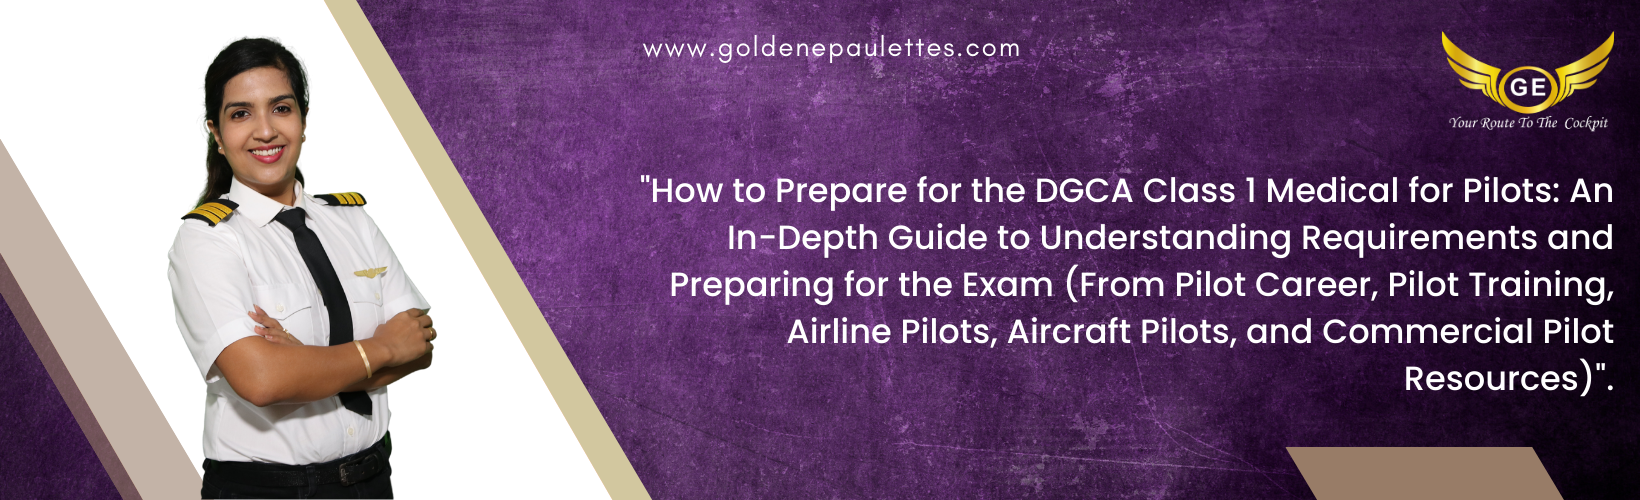 How to Prepare for the DGCA Class 1 Medical for Pilots